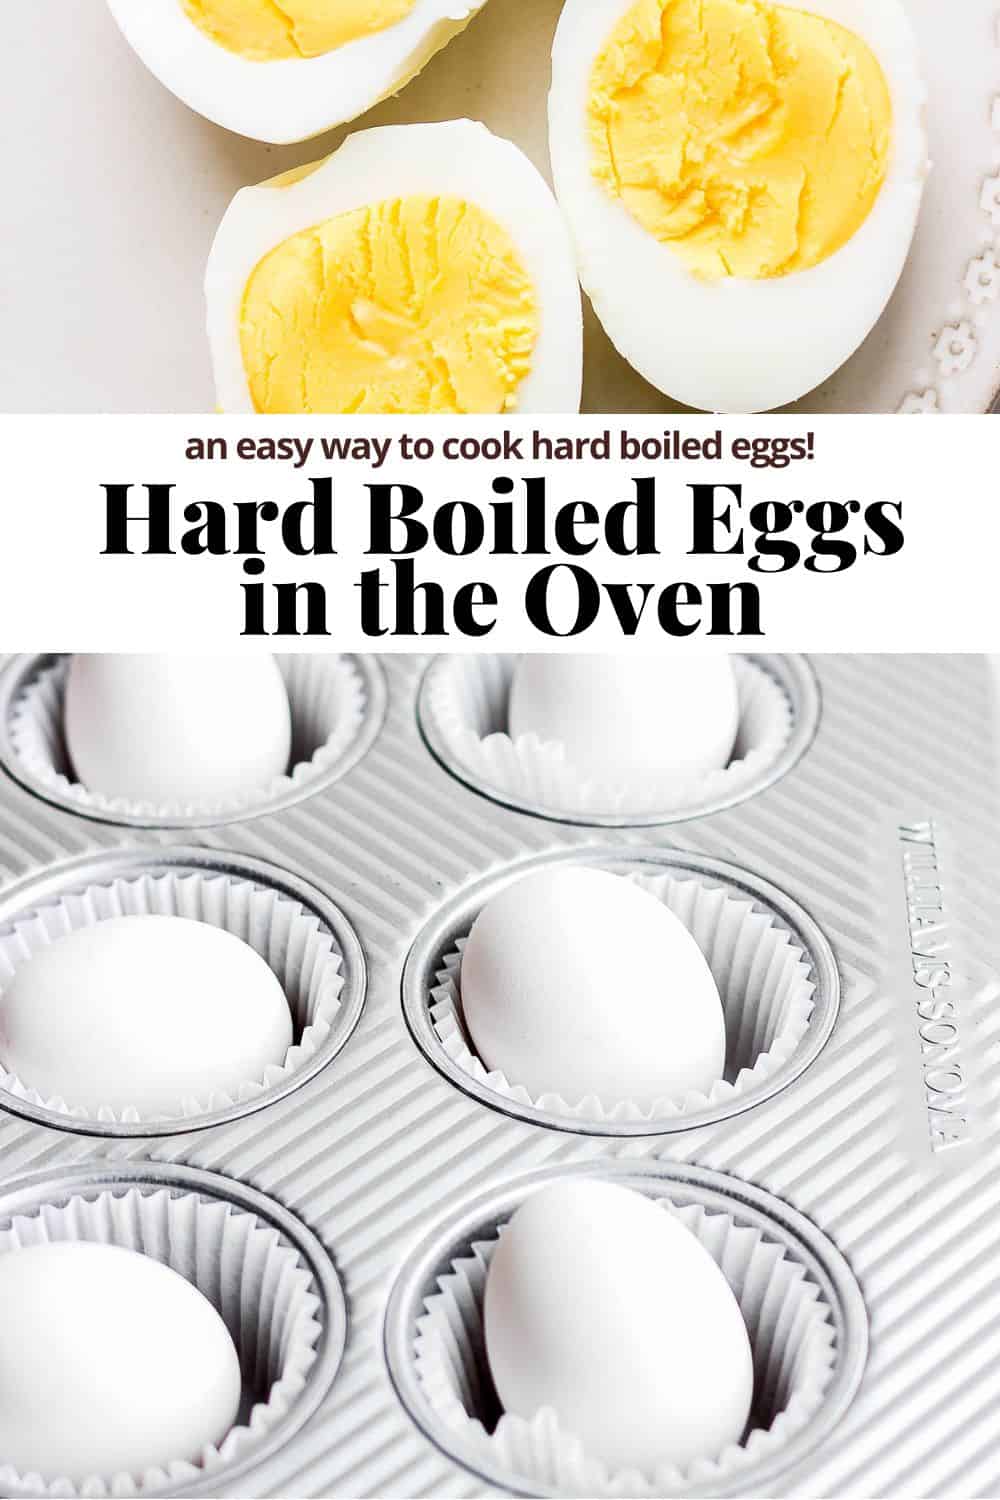 Pinterest image showing two hard boiled eggs cut lengthwise, yolk side up, the recipe title. and then a bottom picture of eggs in the muffin liners.